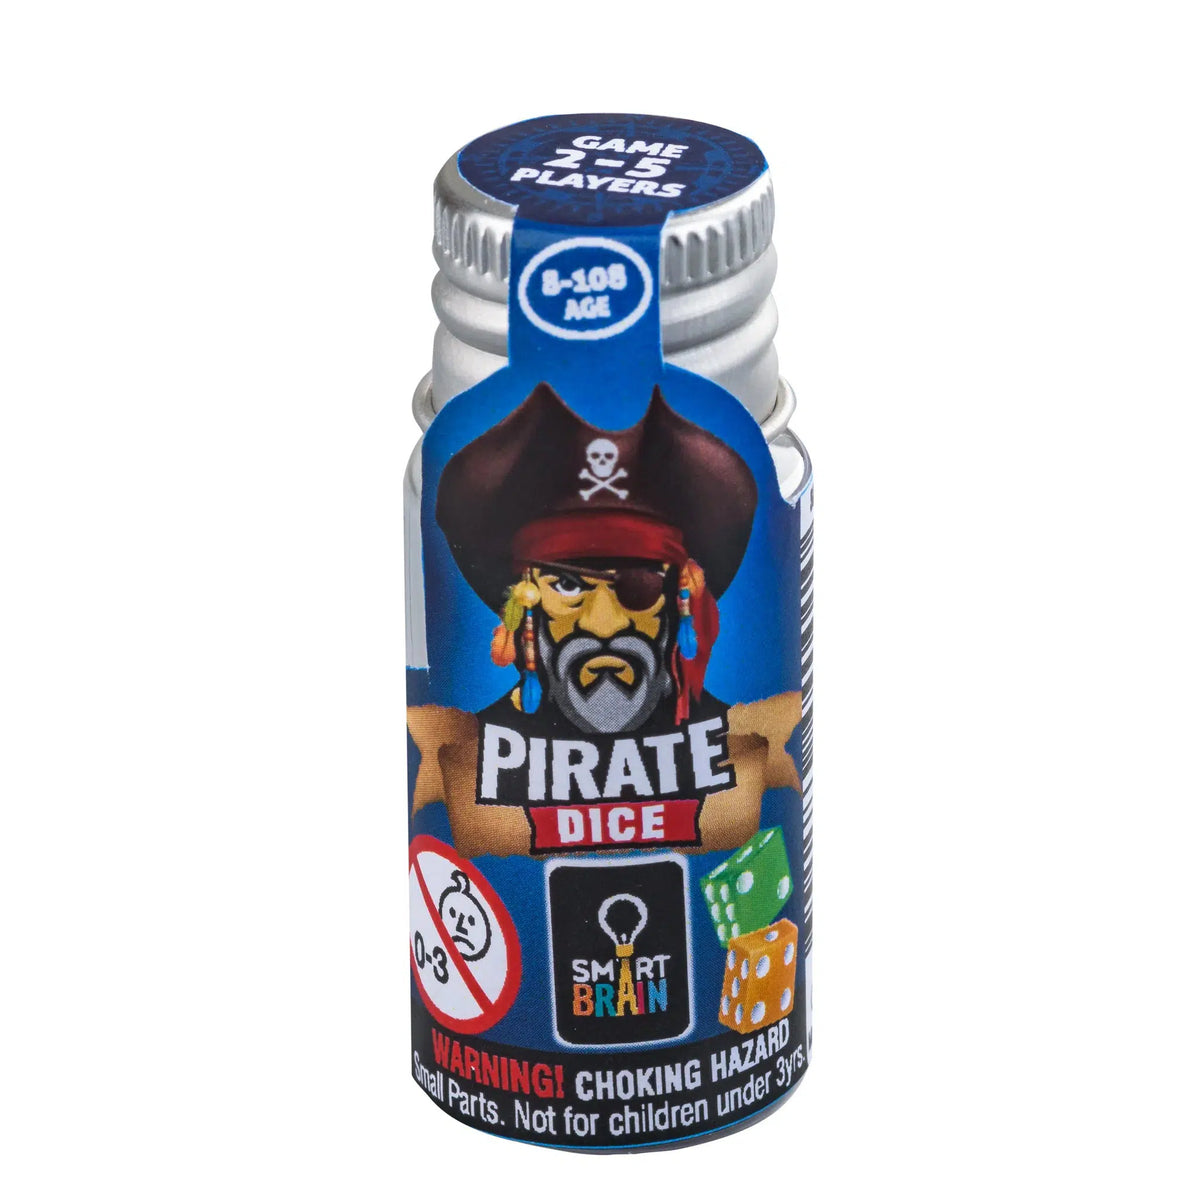 Front view of the blue Pirate Dice Bottle-Game.